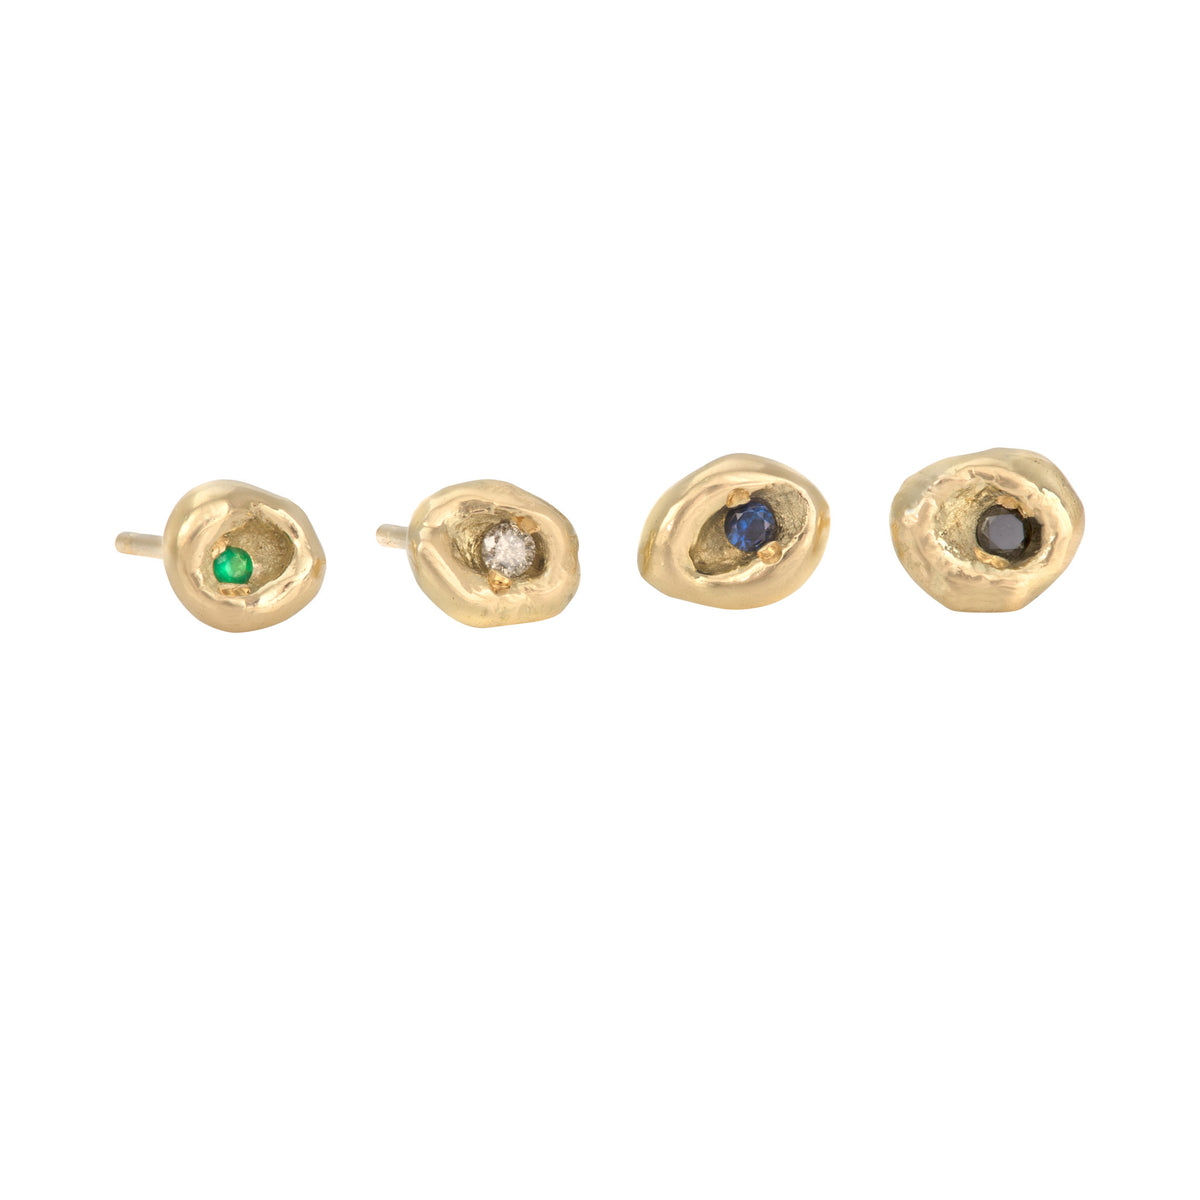 MODERN PAVE Melt Single Stud Earring in 18carat Yellow Gold